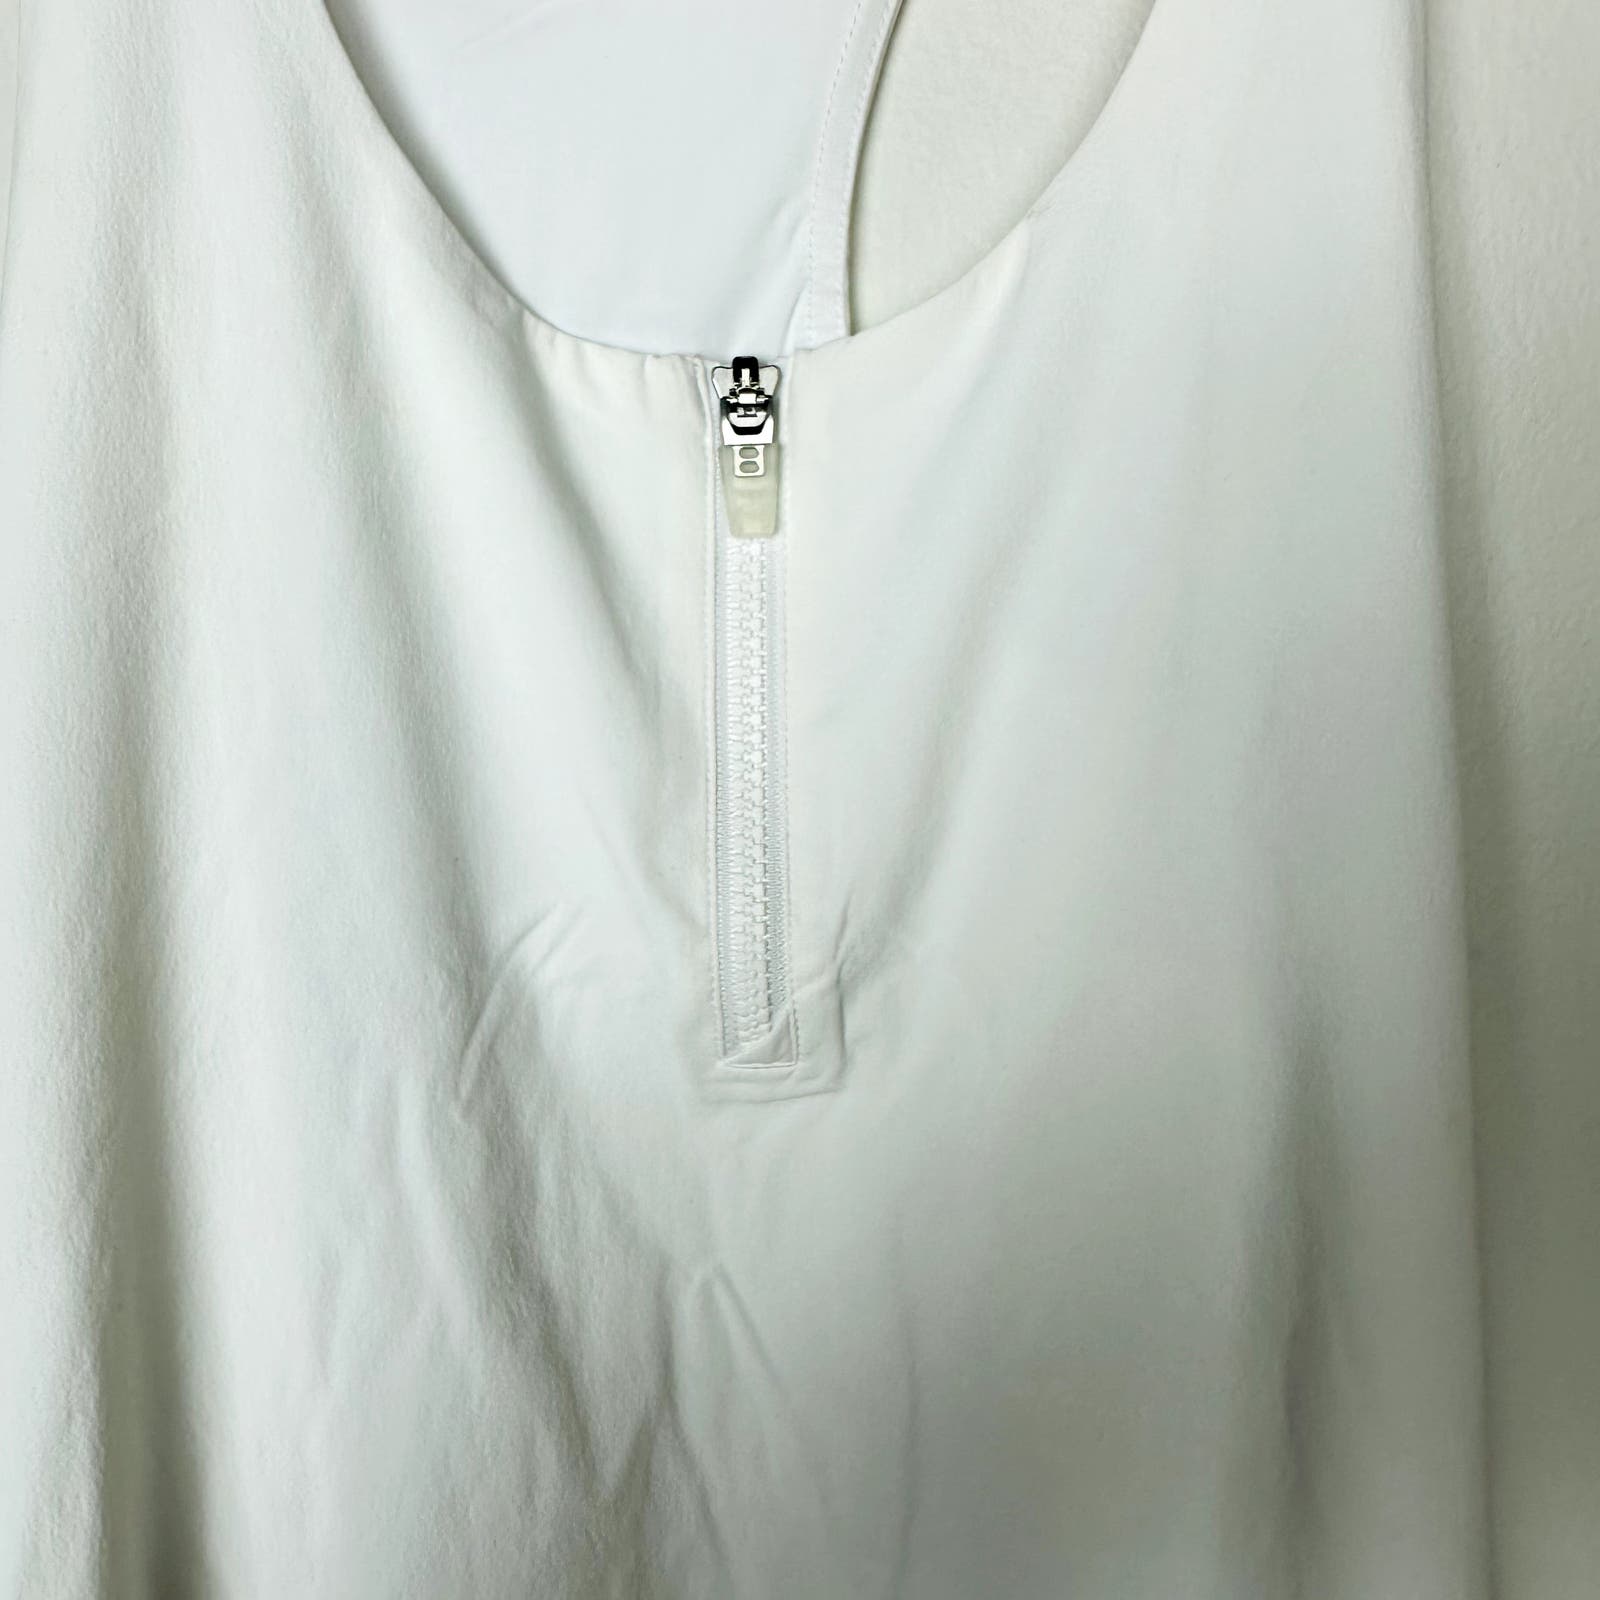 Outdoor Voices NWT Ace Dress Sport White Size Large